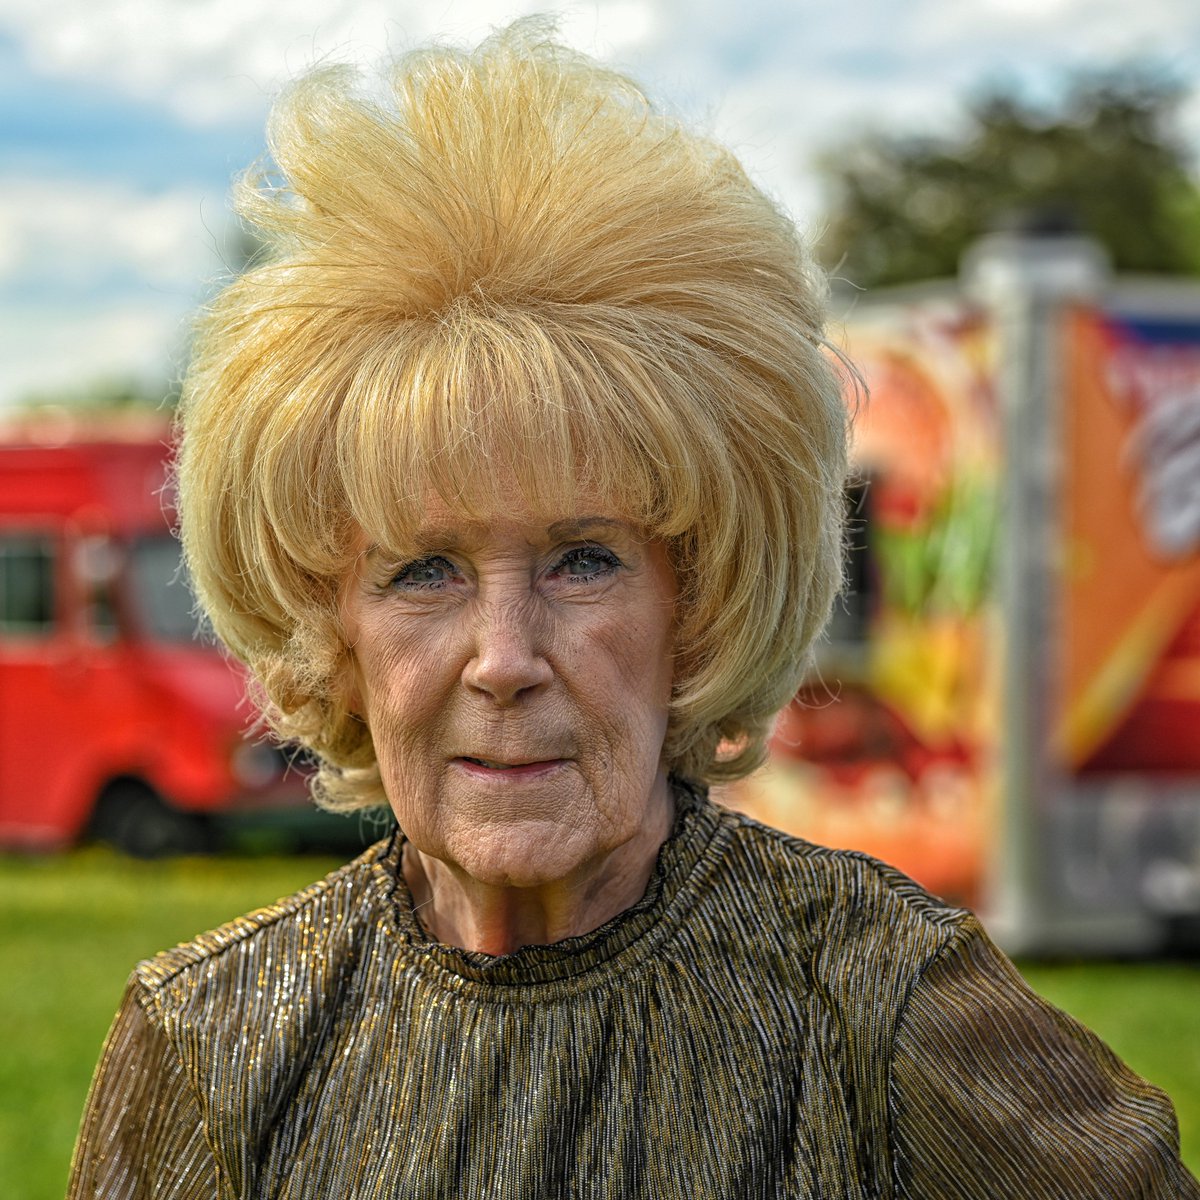 When I saw this stylish lady walking around a food truck festival yesterday I knew I had to get a portrait of her. Lois, age 83, was great. She was all over the place with her great grandson looking for just the right food. #streetphotography #portrait